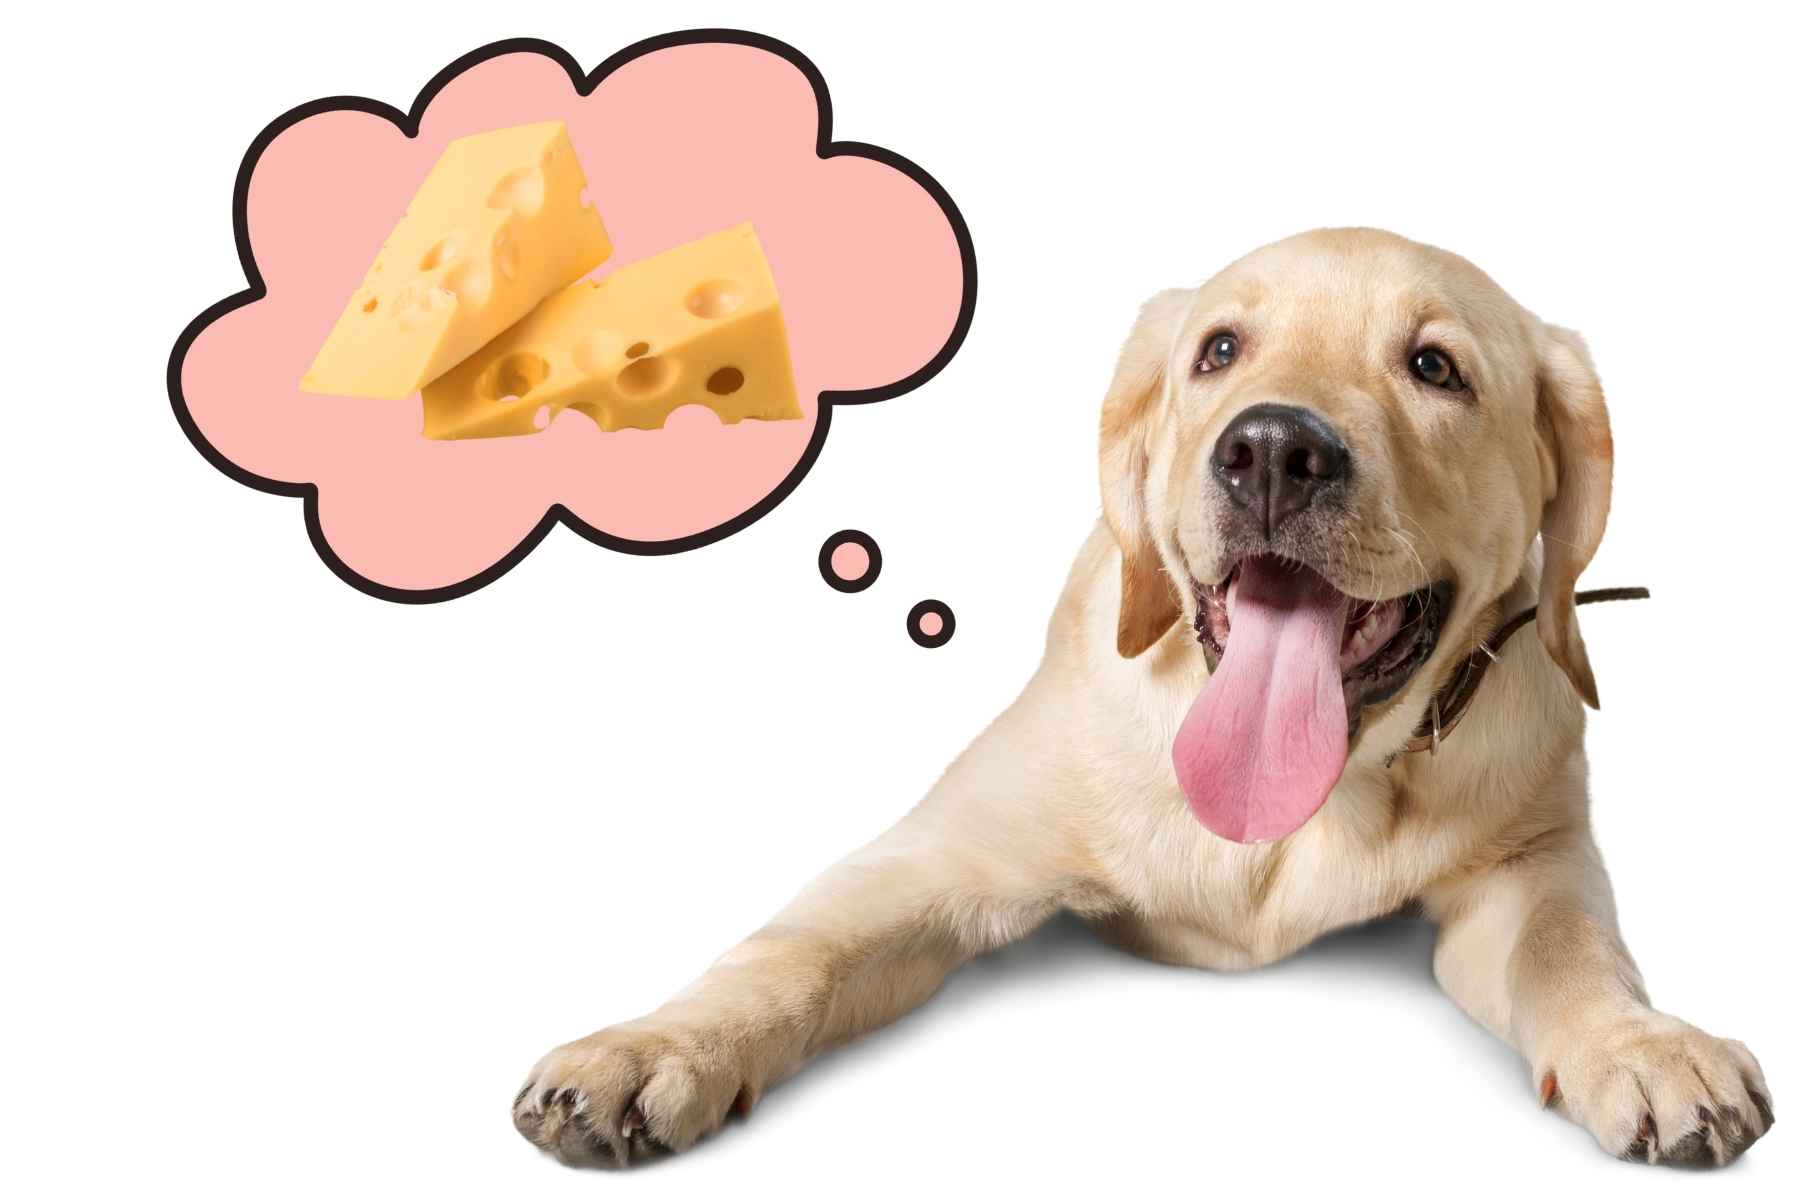 Dog thinking about cheese